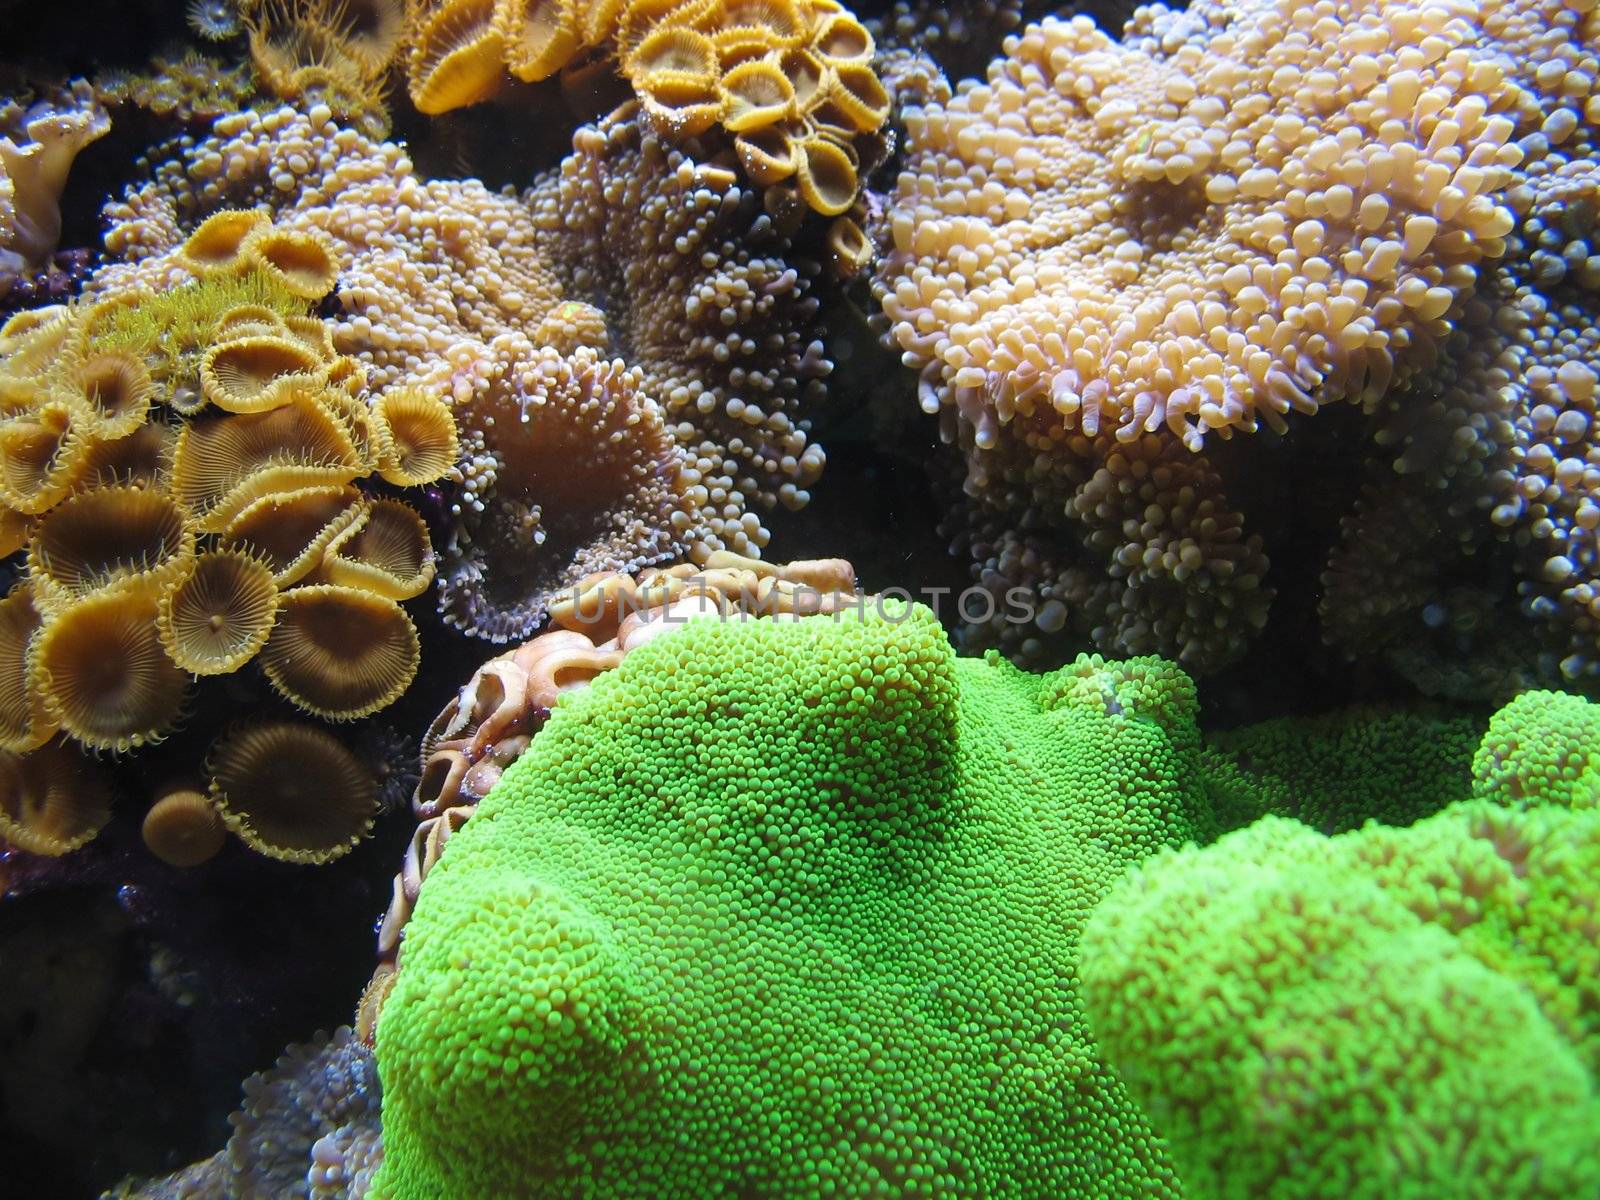 Some underwater life; anemones and other aquatic life on an underwater reef.